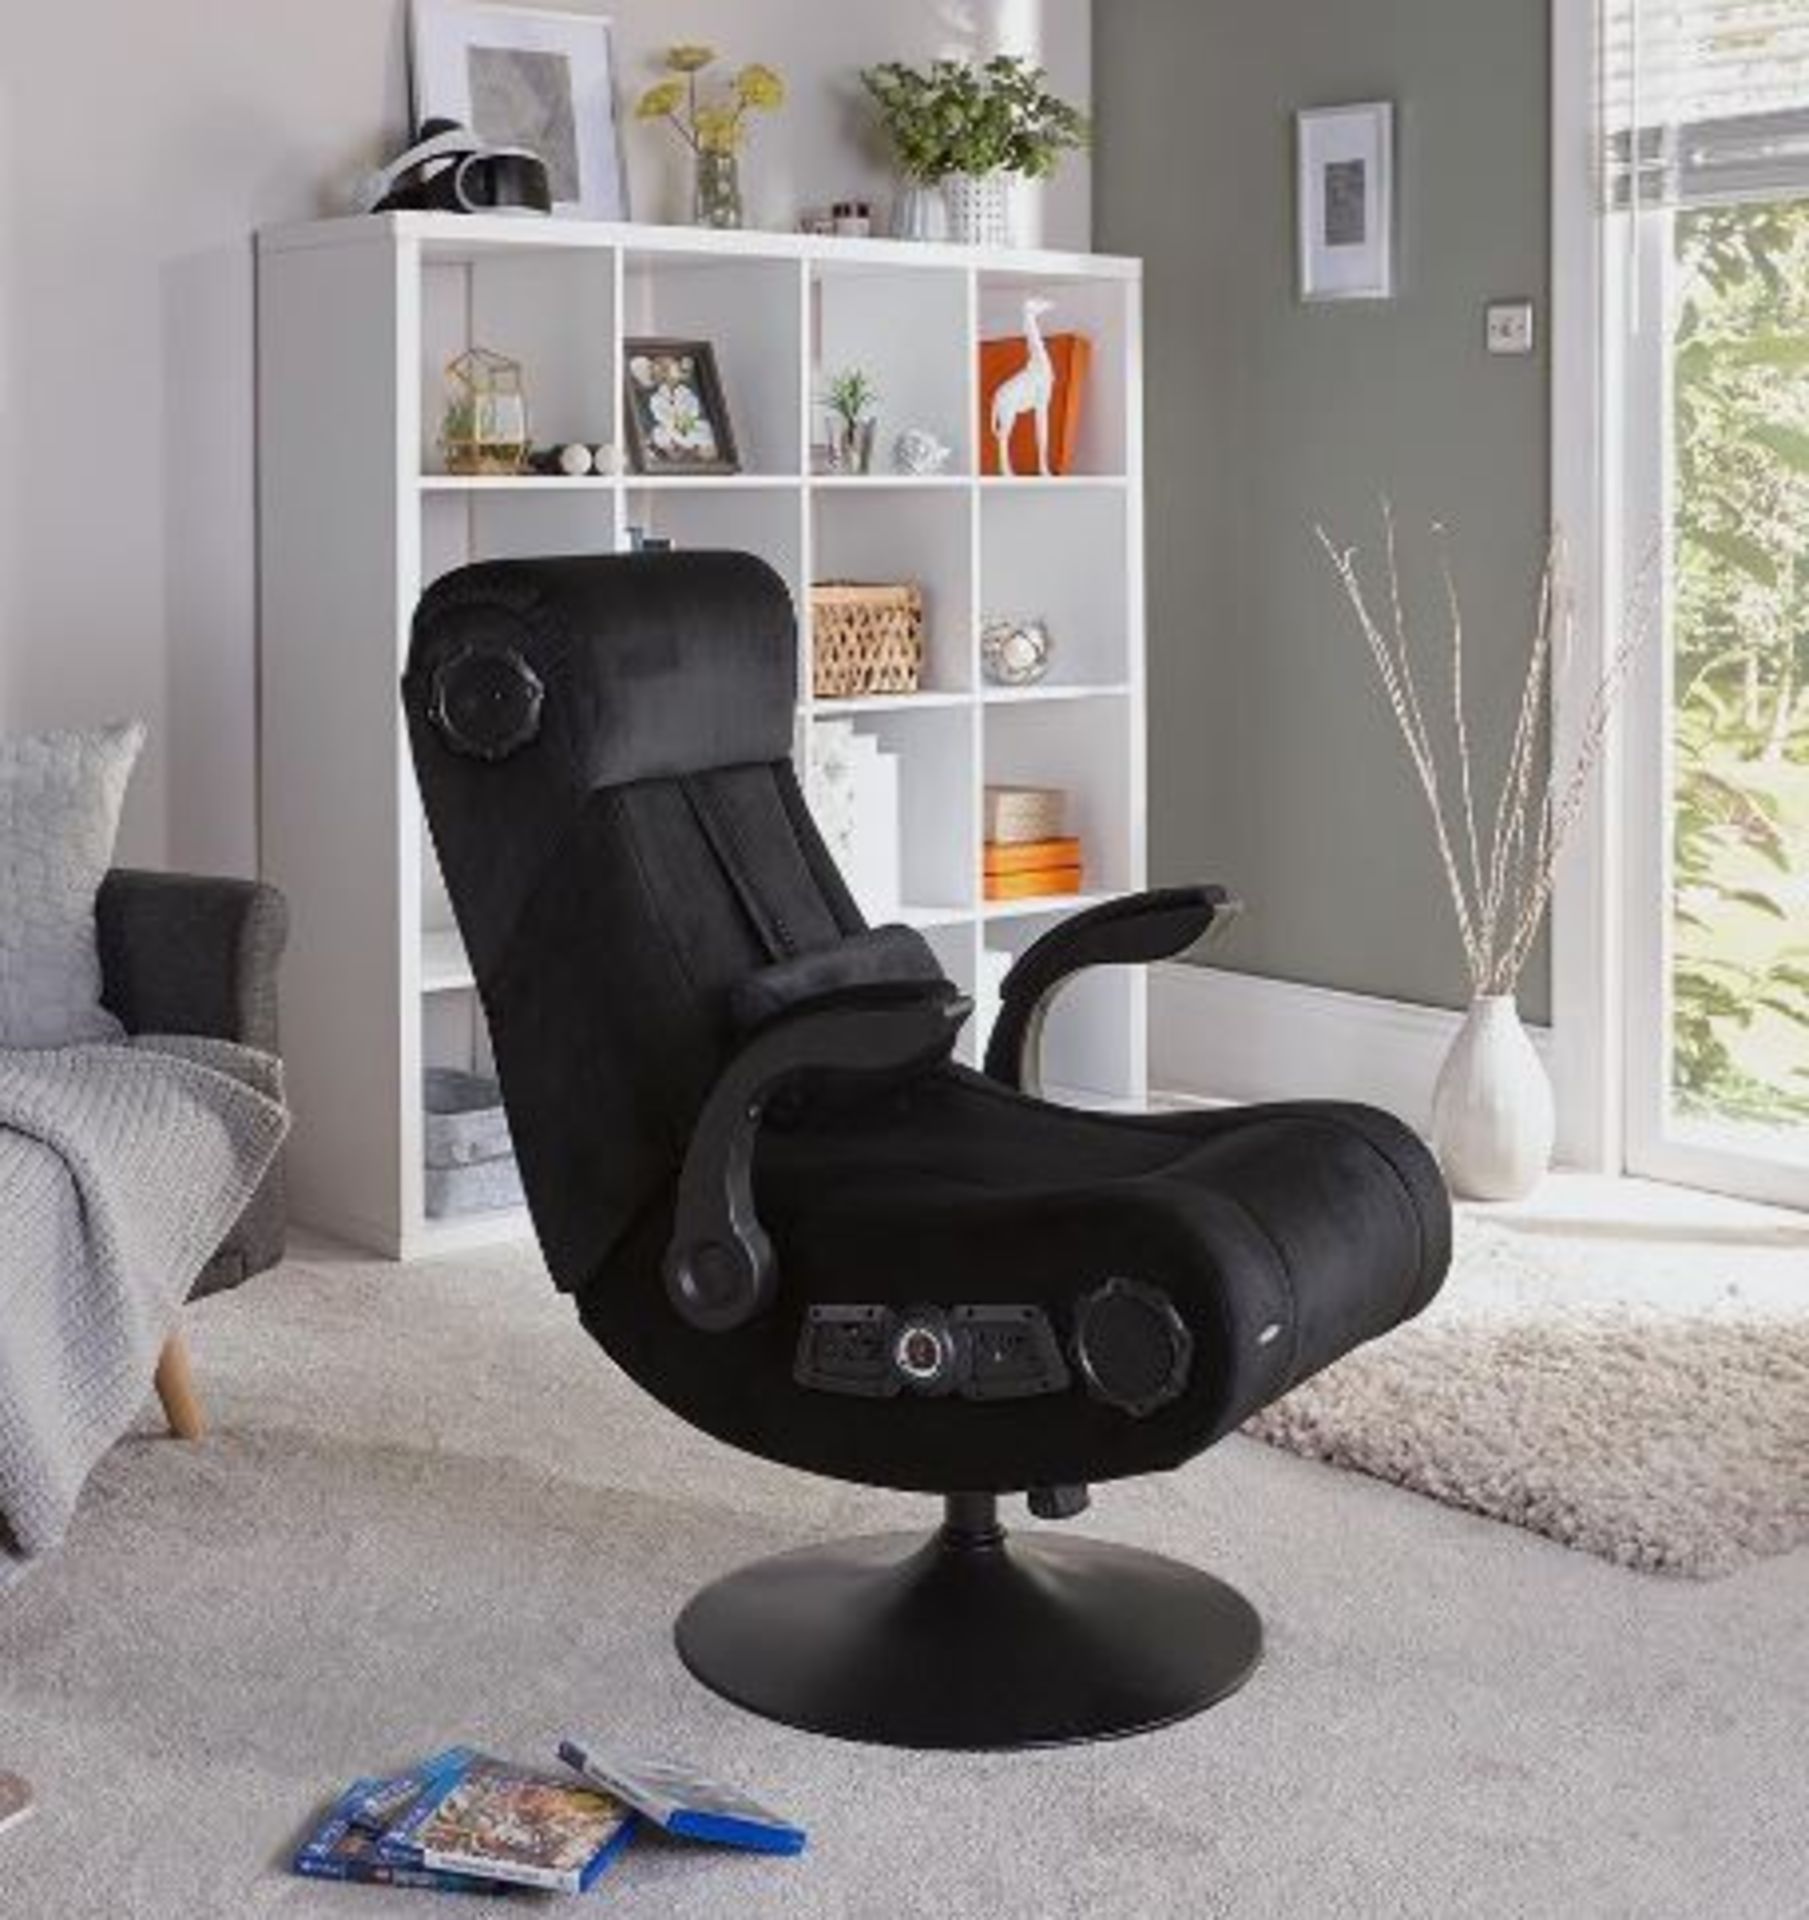 (P2) X-Rocker Deluxe 4.1 Chenille Audio Gaming Pedestal Chair RRP £229. Unit Appears Complete. It